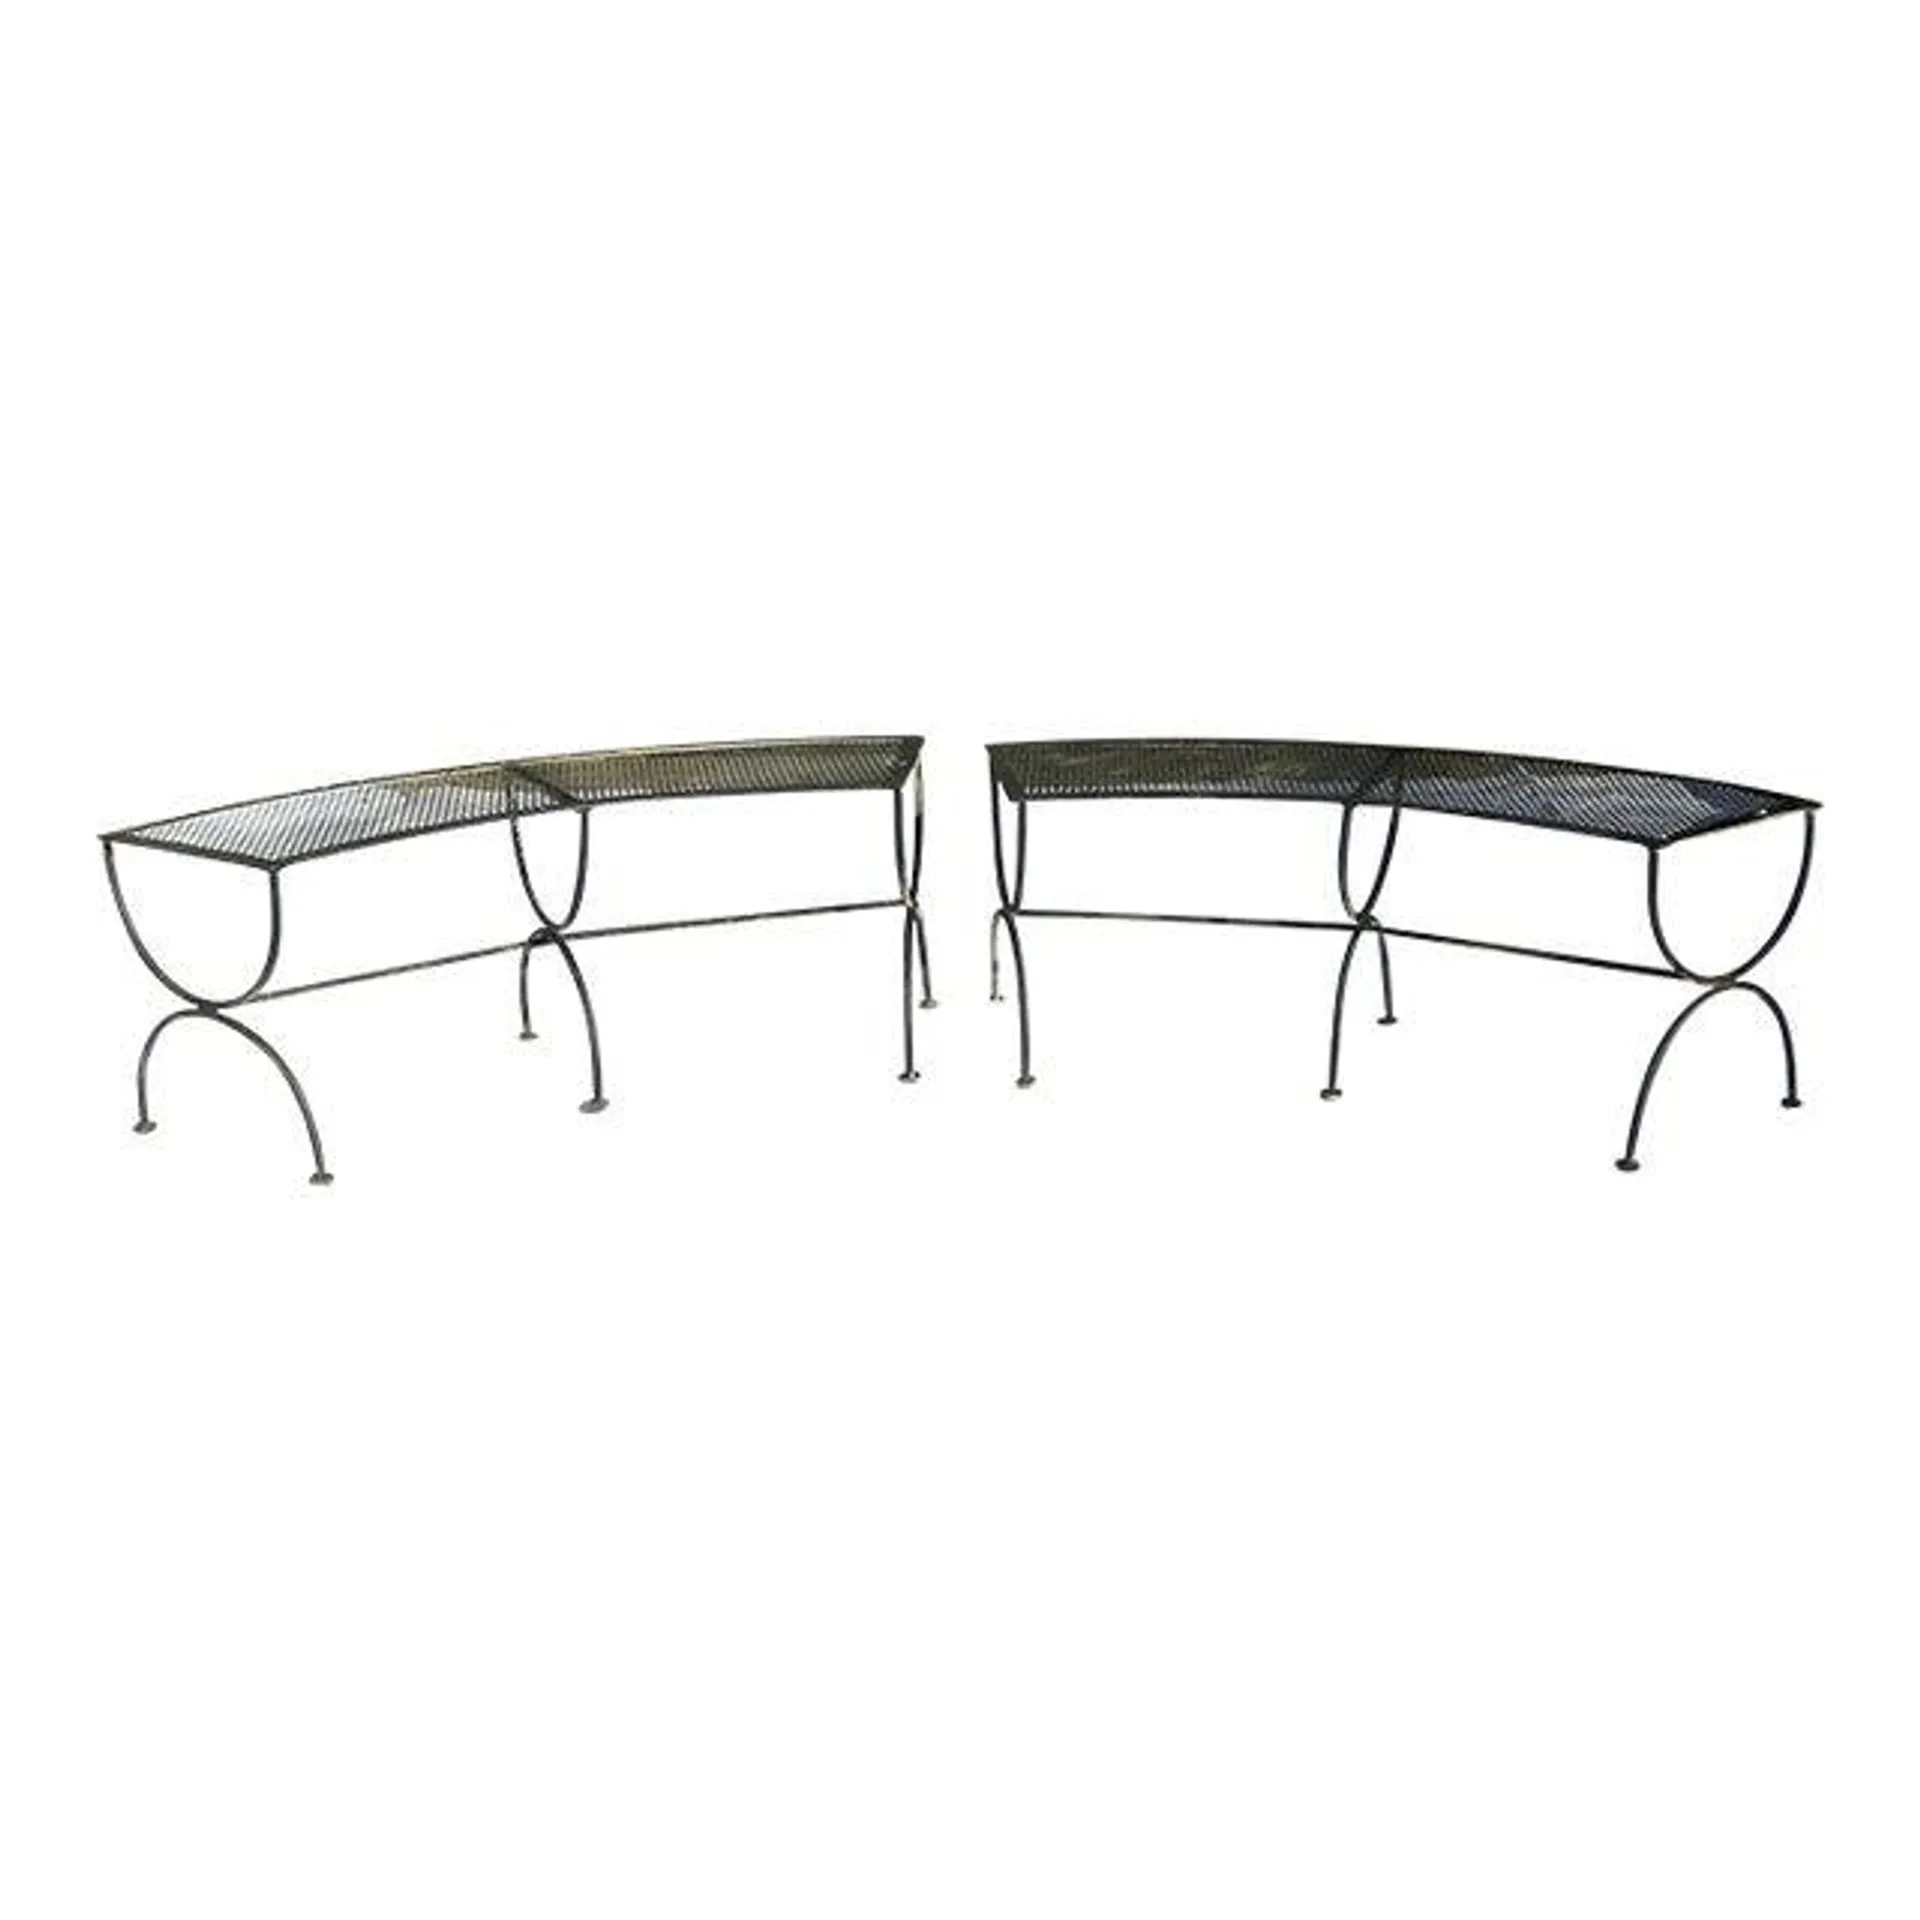 Pair of Curved Iron Benches Mesh Seats